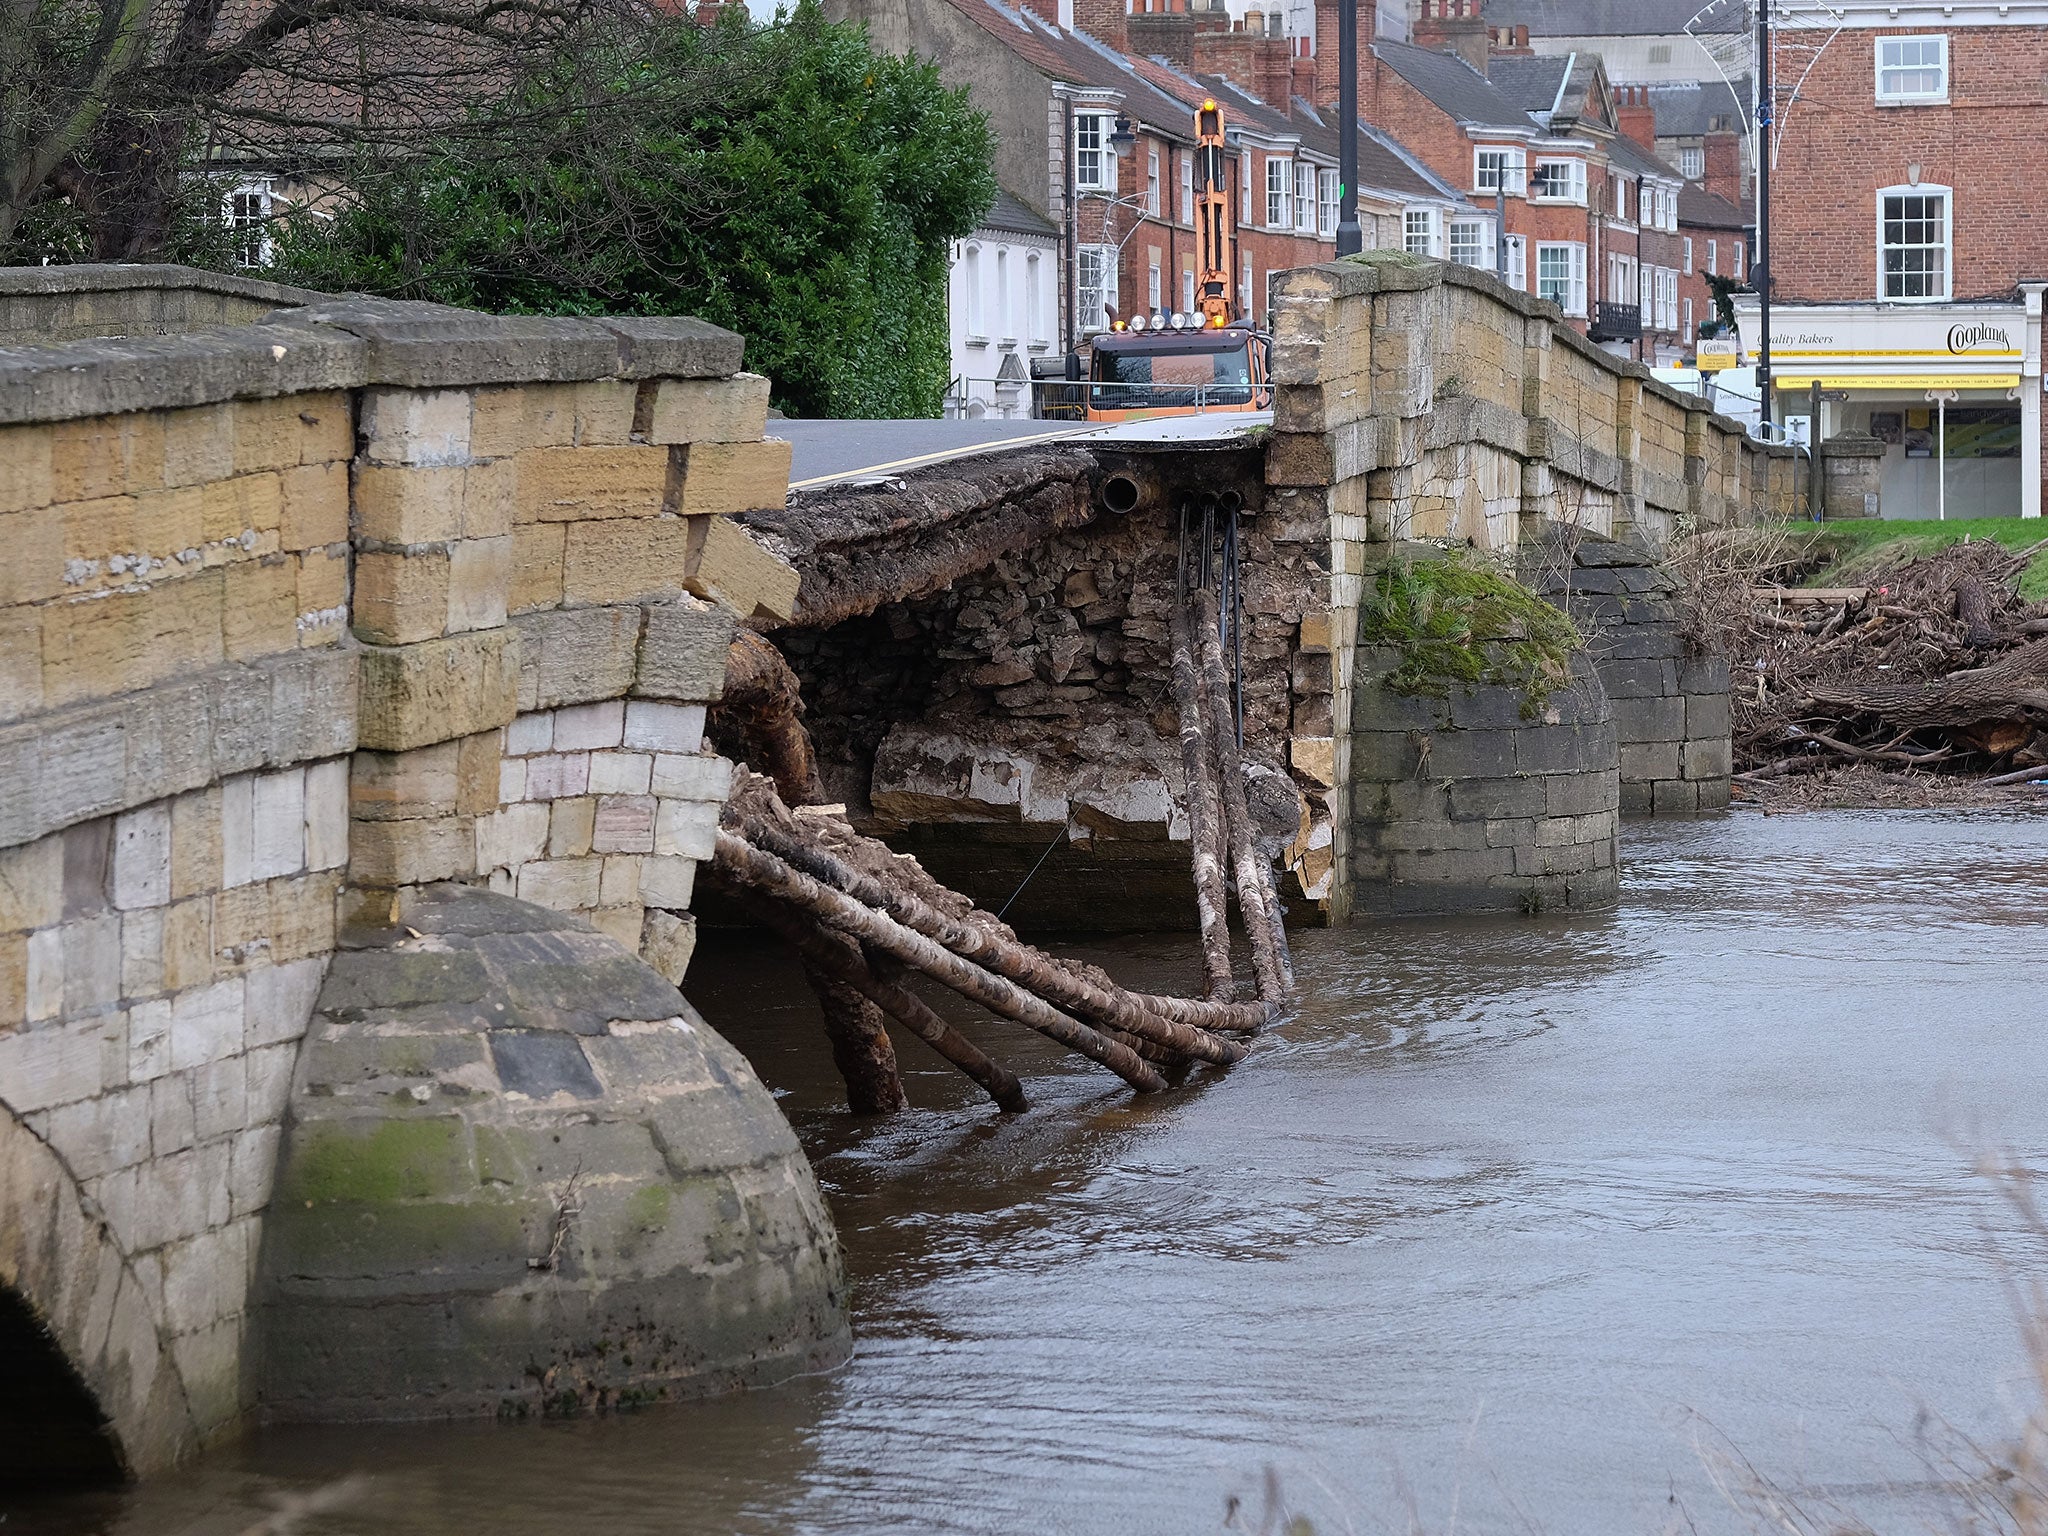 Bridge over the River Wharfe that collapsed due to flooding on 30 December 2015 in Tadcaster